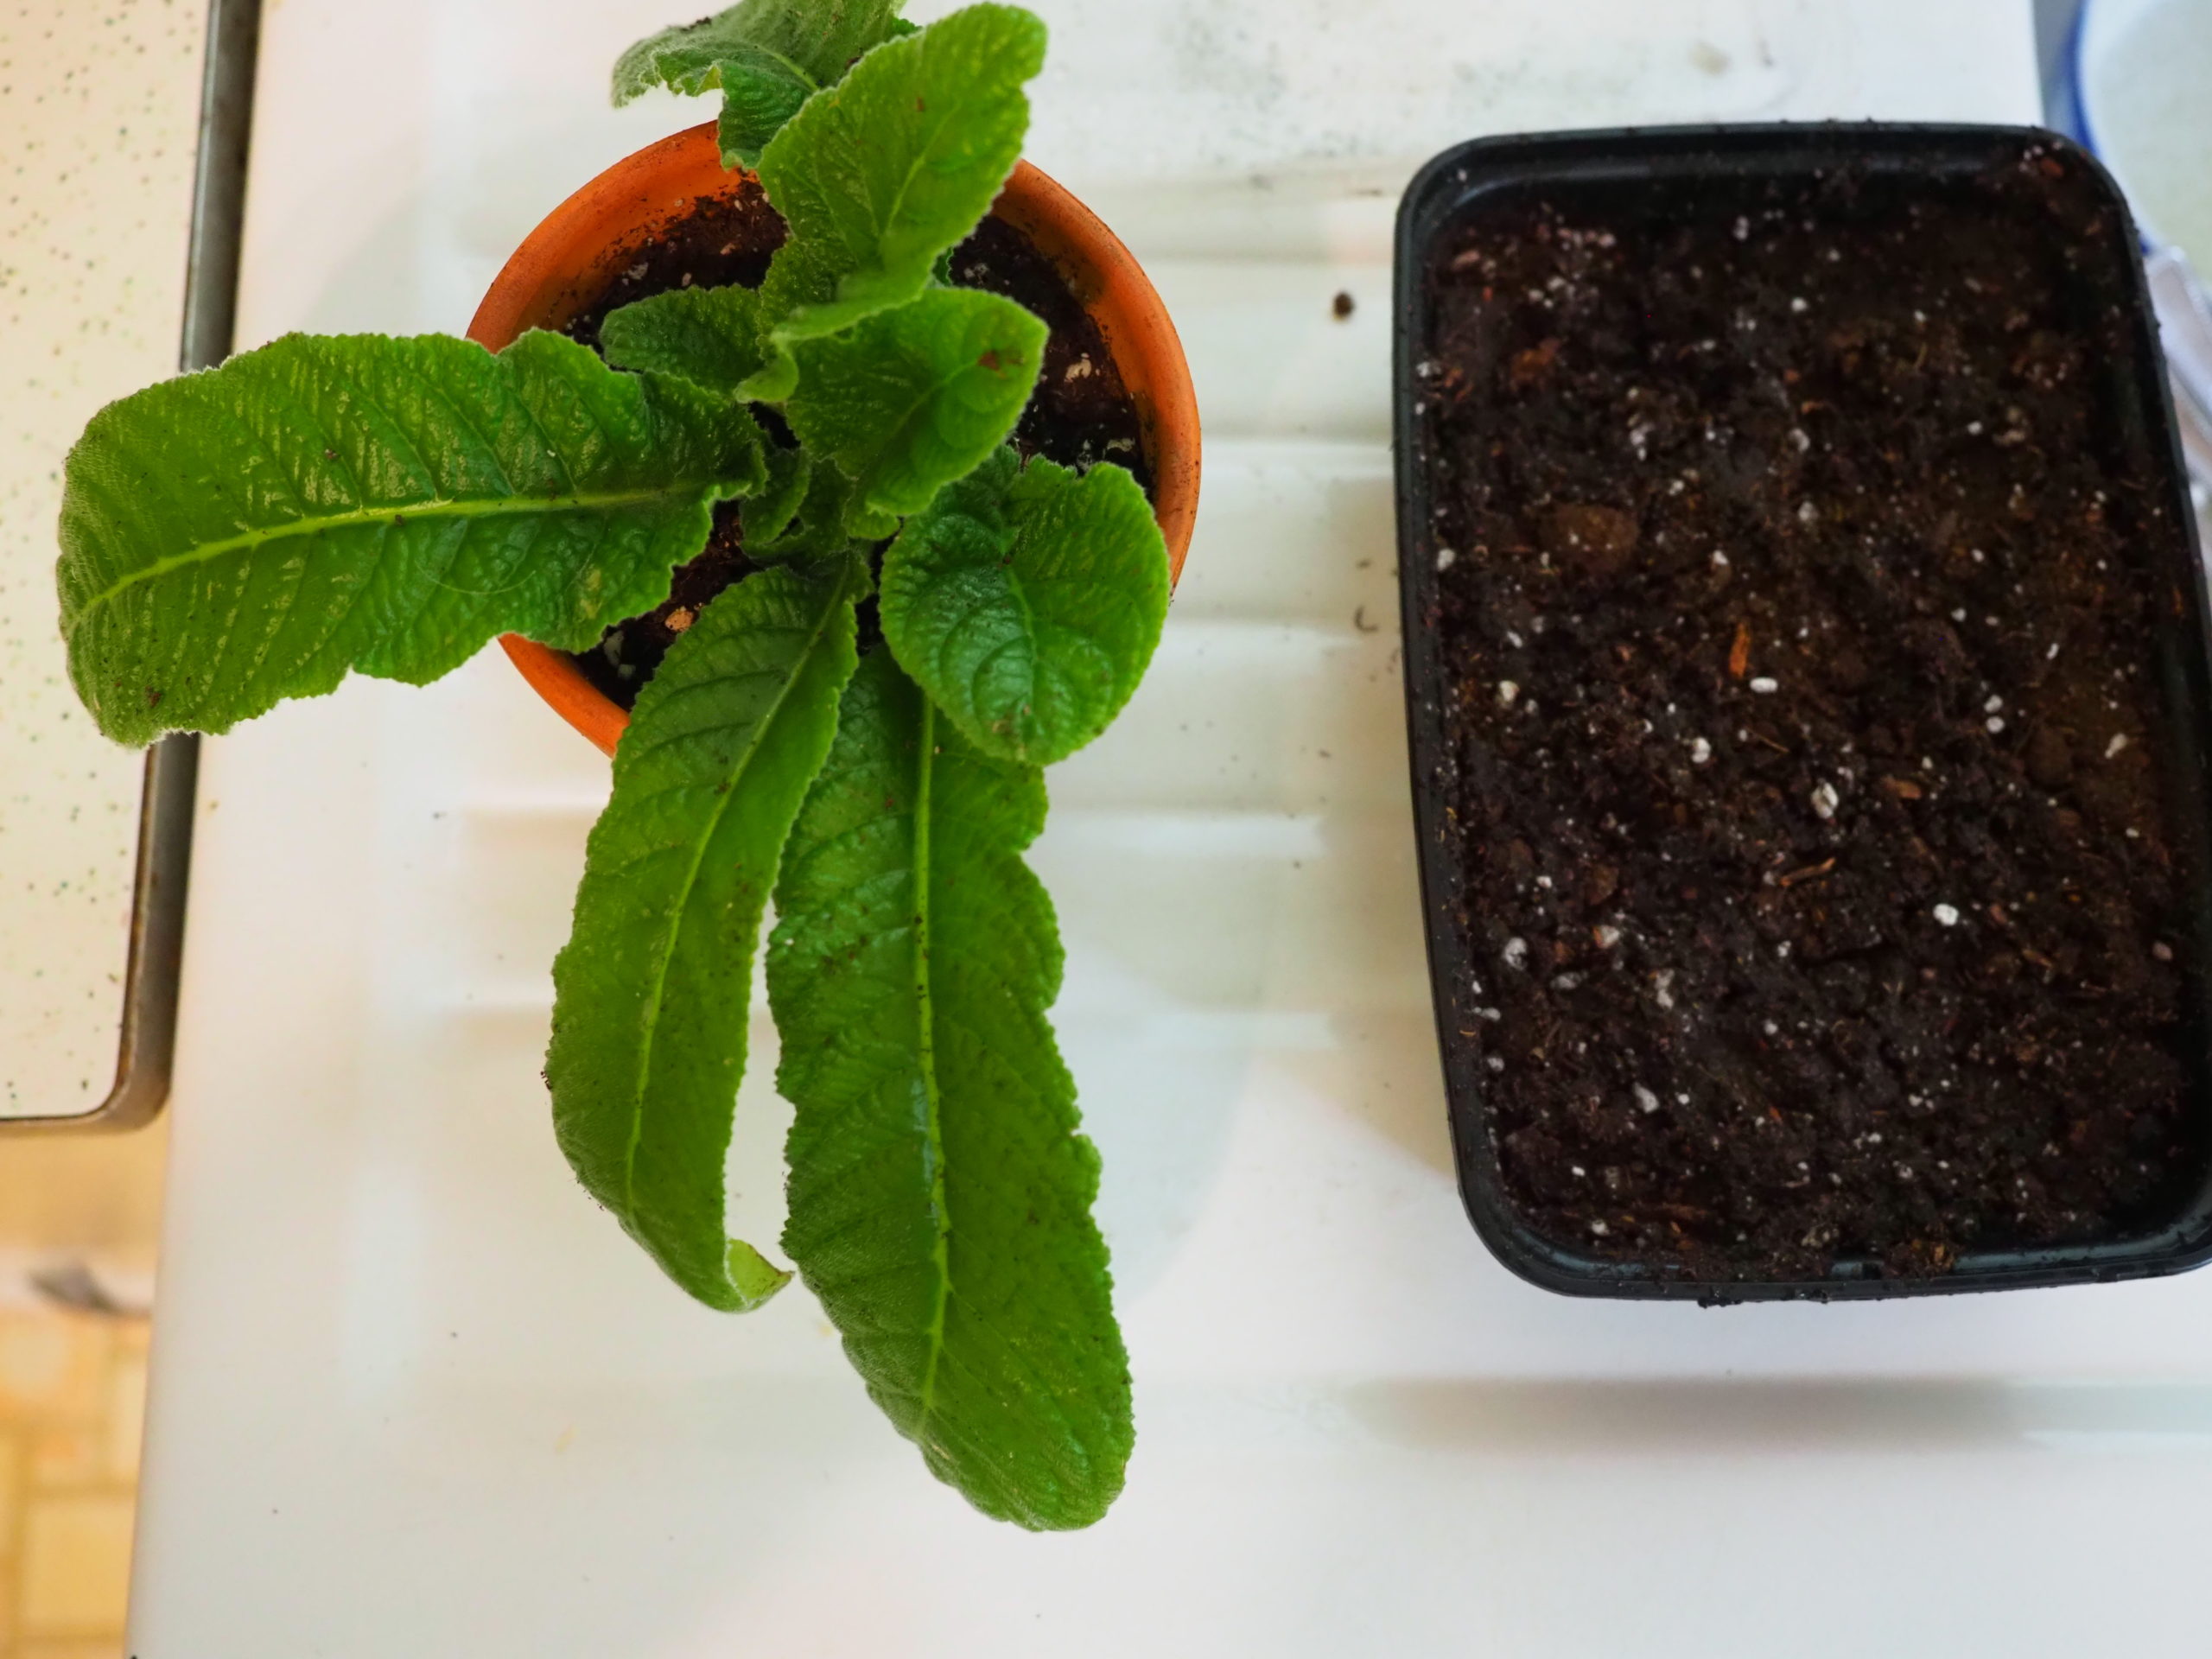 A young Streptocarpus plant on the left. Note the midrib running the length of the leaves. On the right is a take-out food container that will serve as a mini-greenhouse with its clear cover.